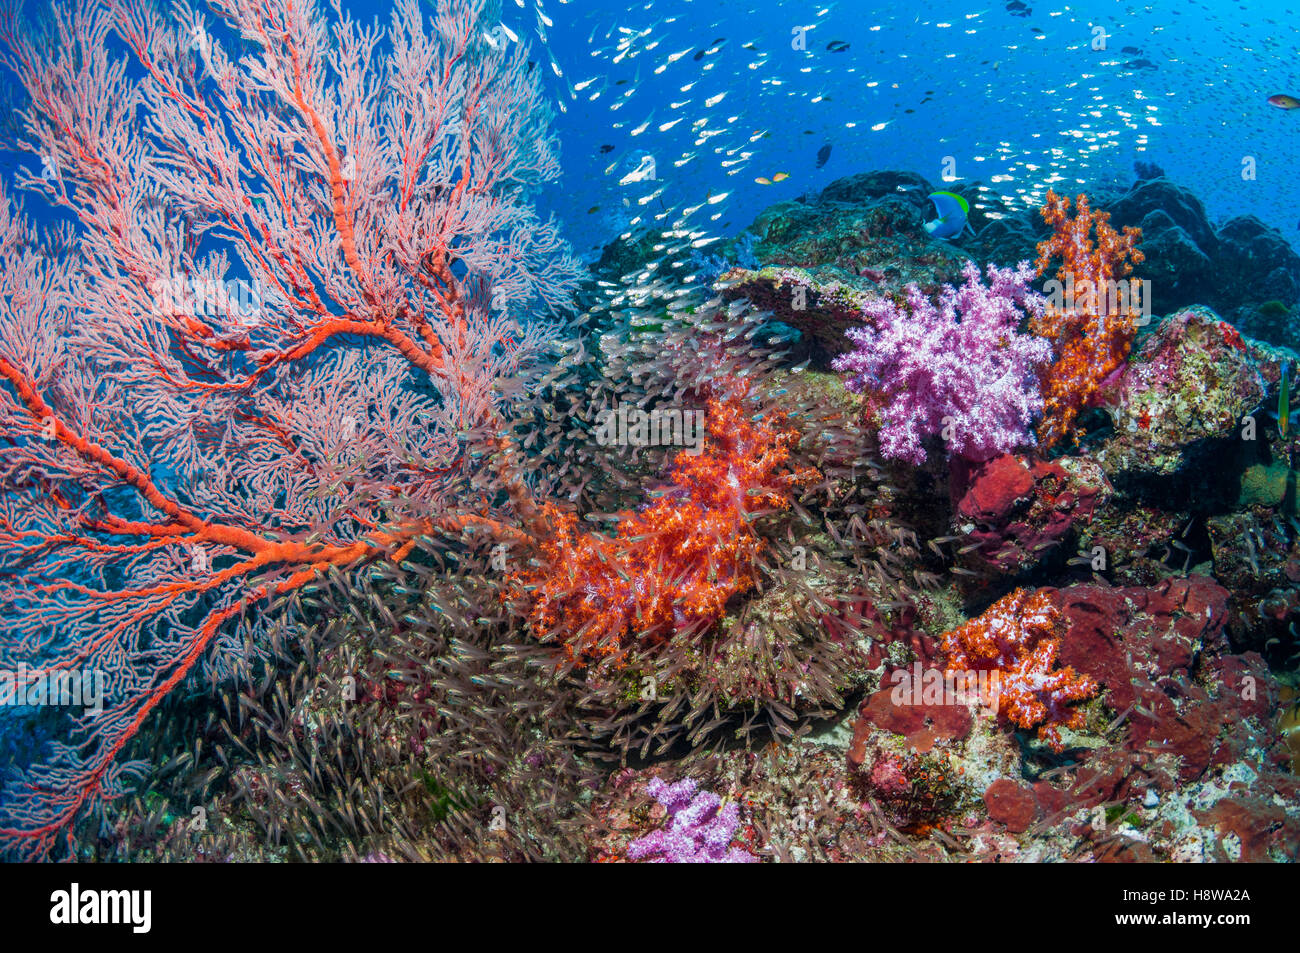 Pygmy sweepers [Parapriacanthus ransonetti] with a Gorgonian sea fan [Melithaea sp.] and soft corals [Dendronephthya sp]. Stock Photo